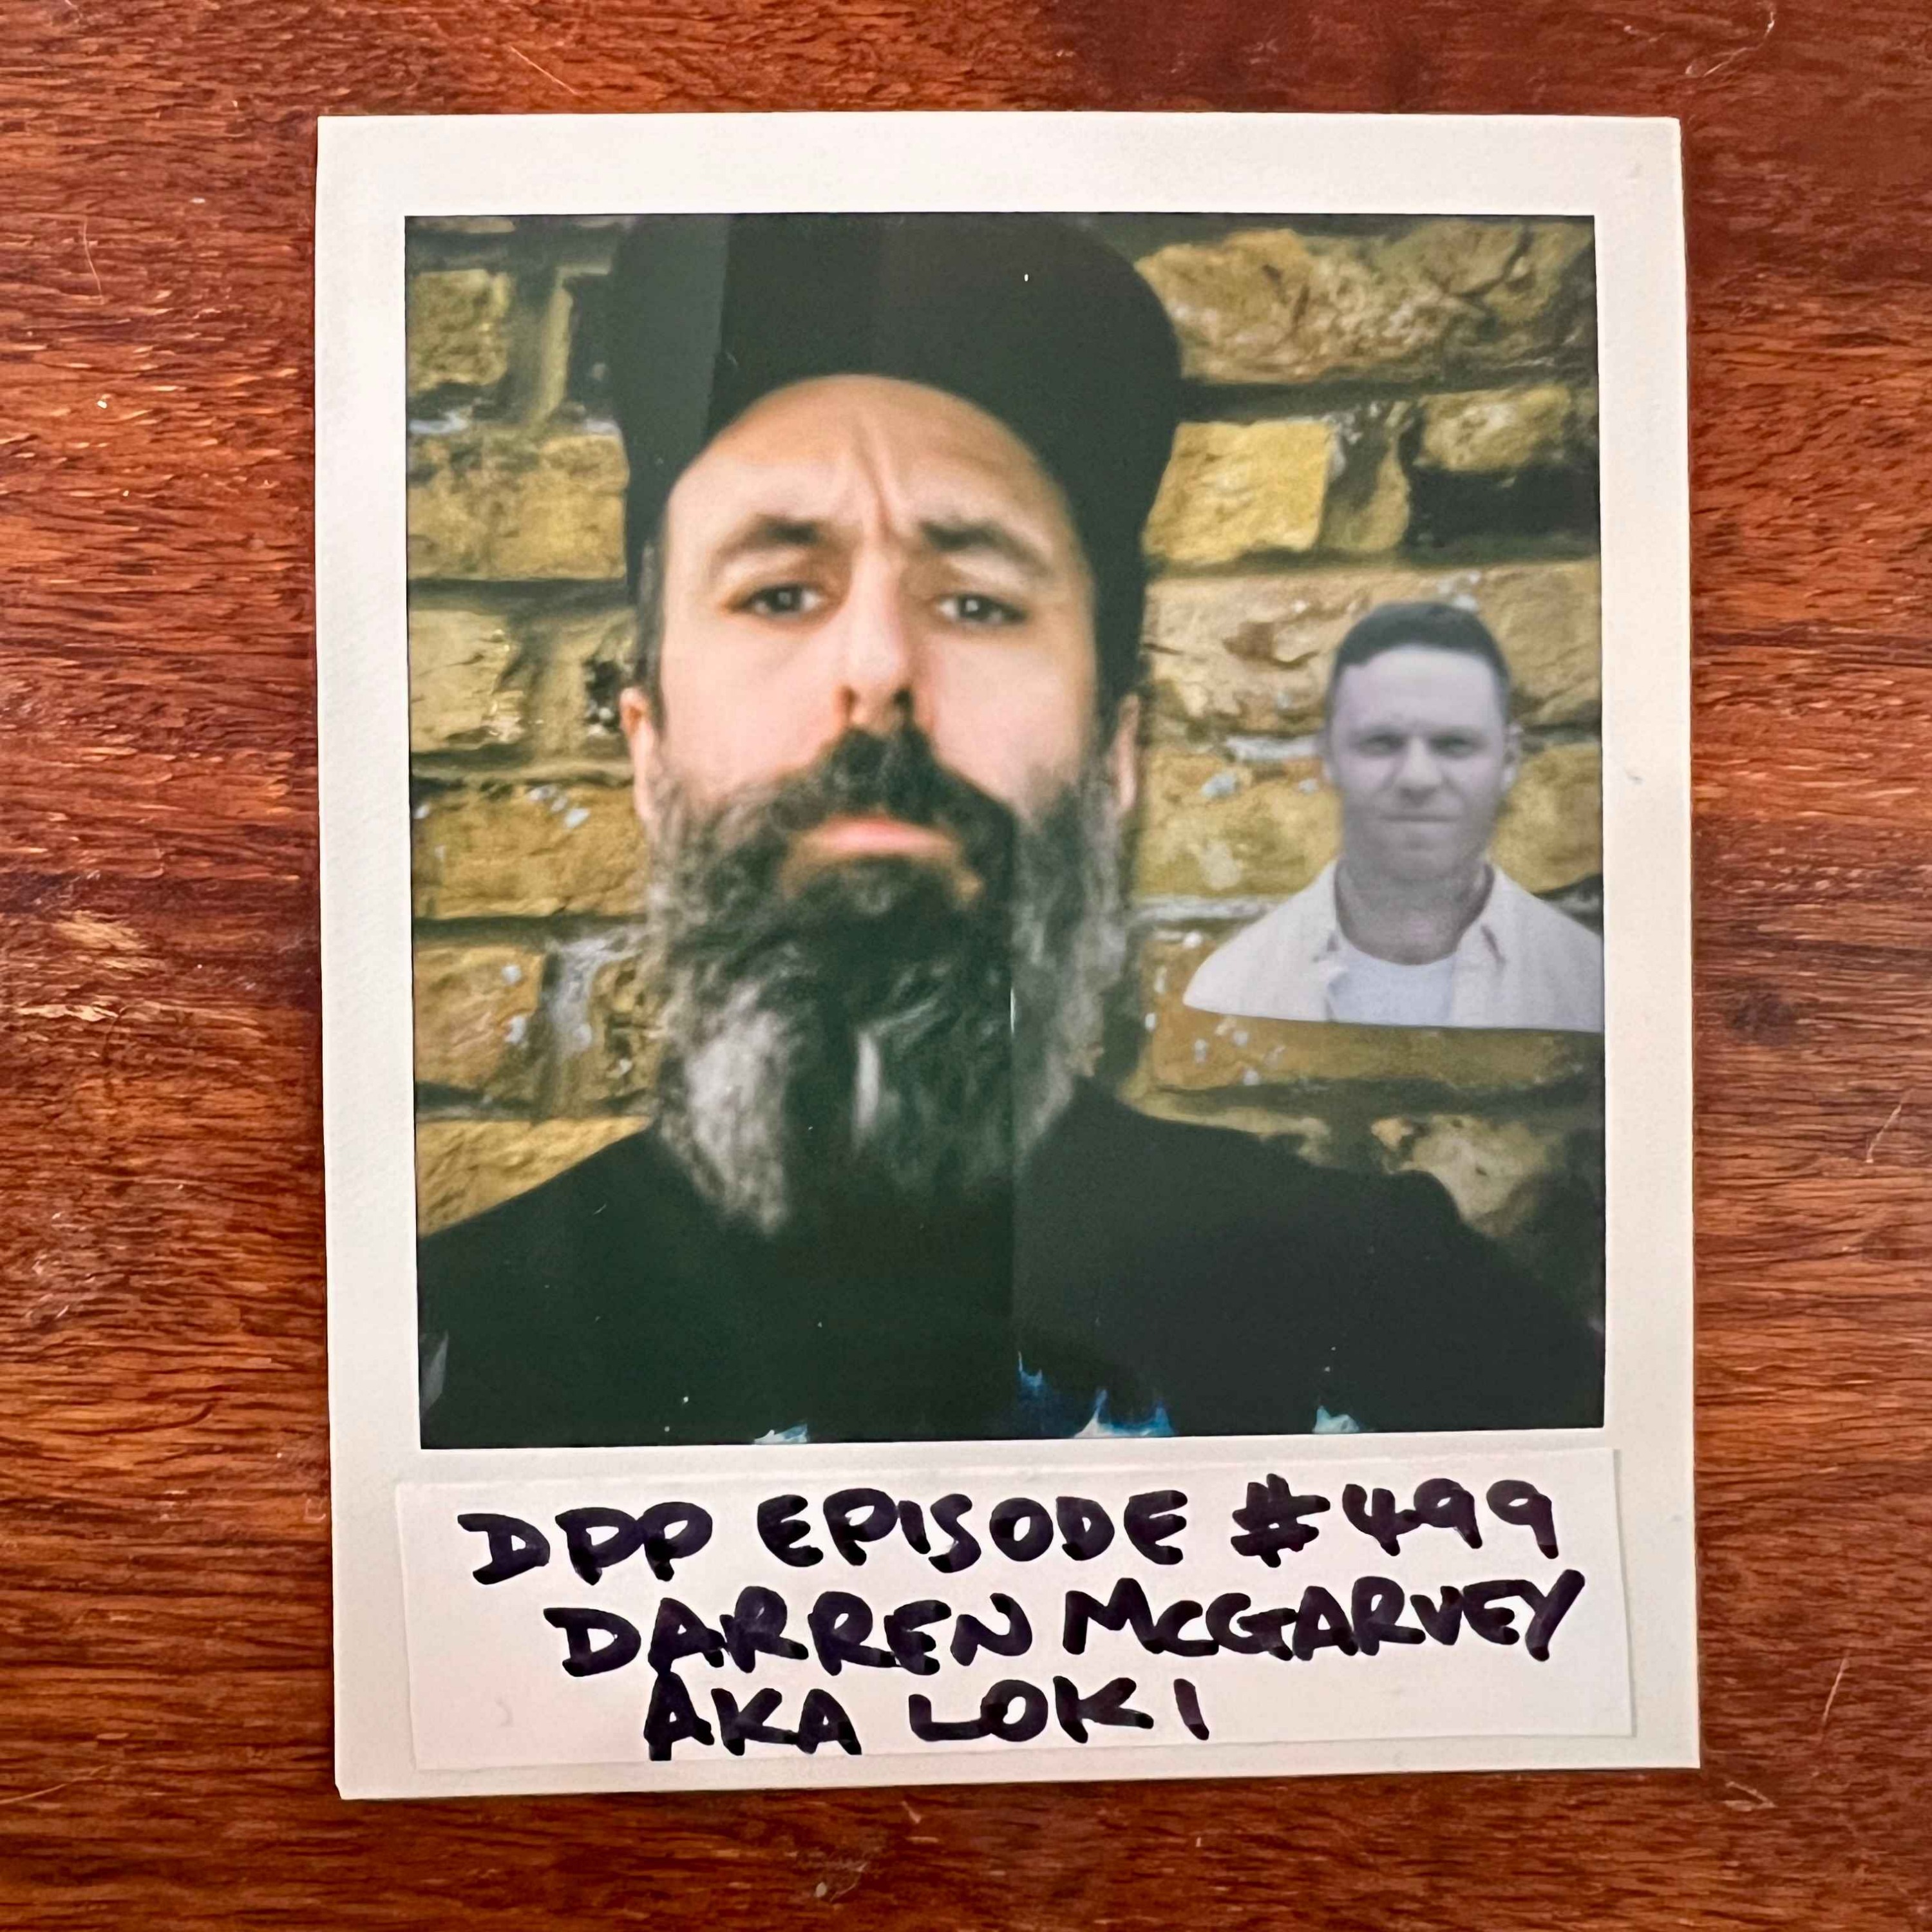 cover art for Darren McGarvey aka Loki • Distraction Pieces Podcast with Scroobius Pip #499